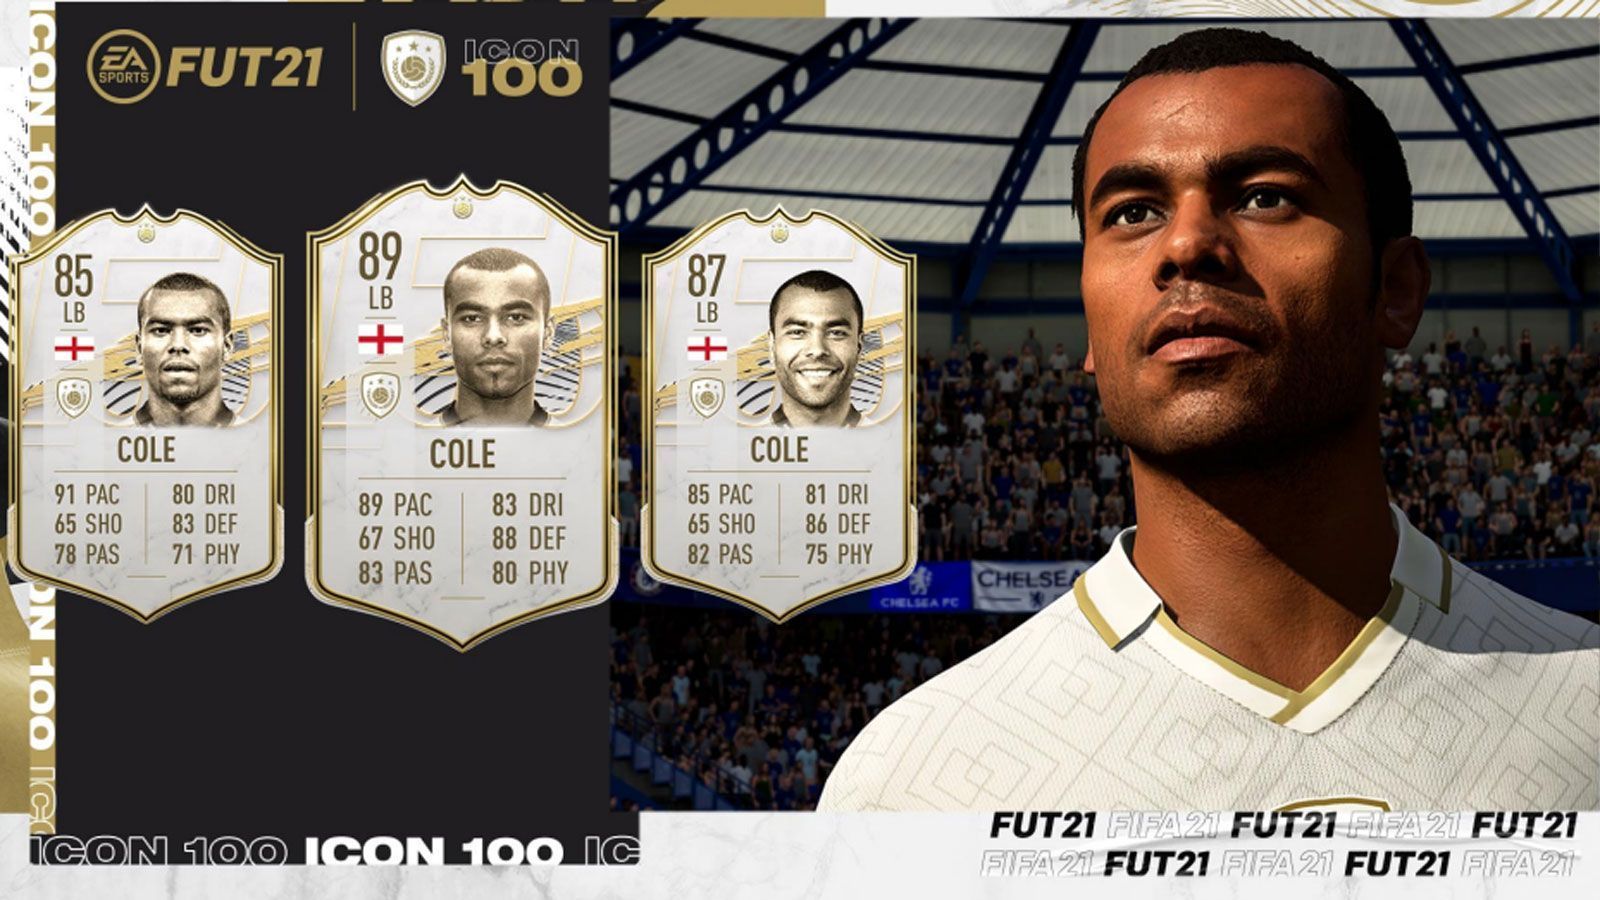 
                <strong>Ashley Cole</strong><br>
                Position: LinksverteidigungBasis-Icon-Rating: 85Mid-Icon-Rating: 87Prime-Icon-Rating: 89
              